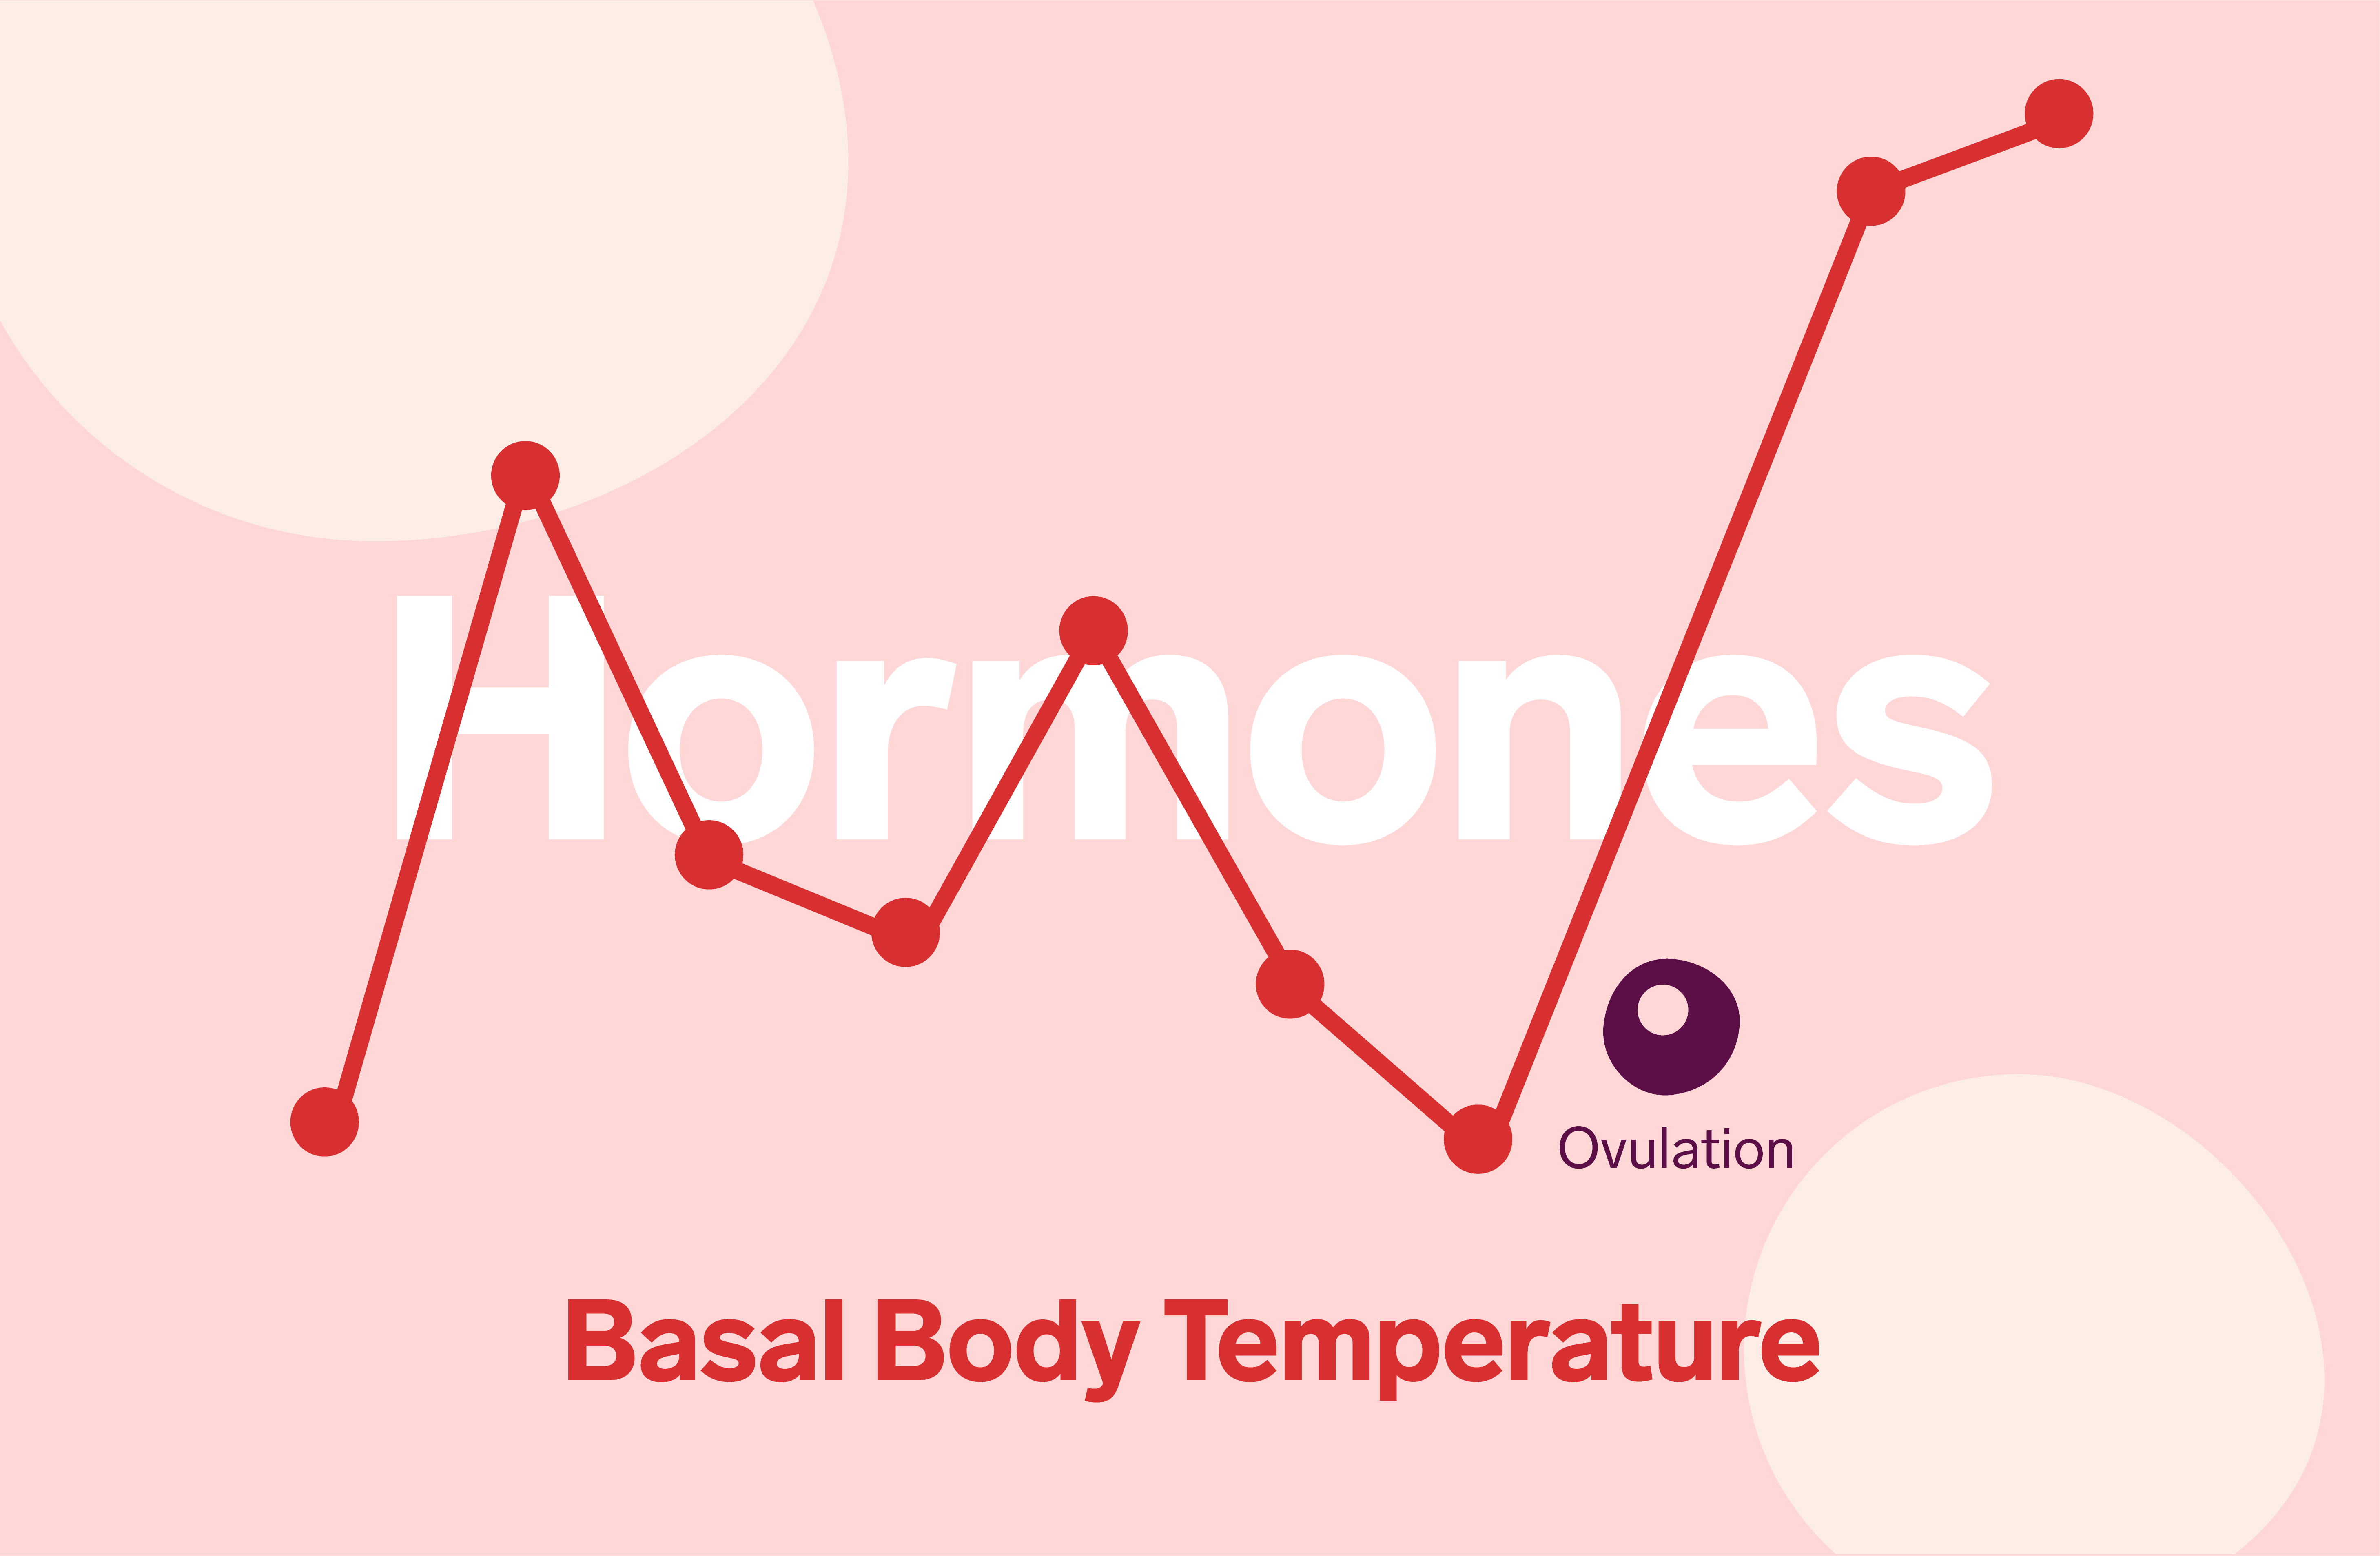 Body Temperature During Ovulation Chart